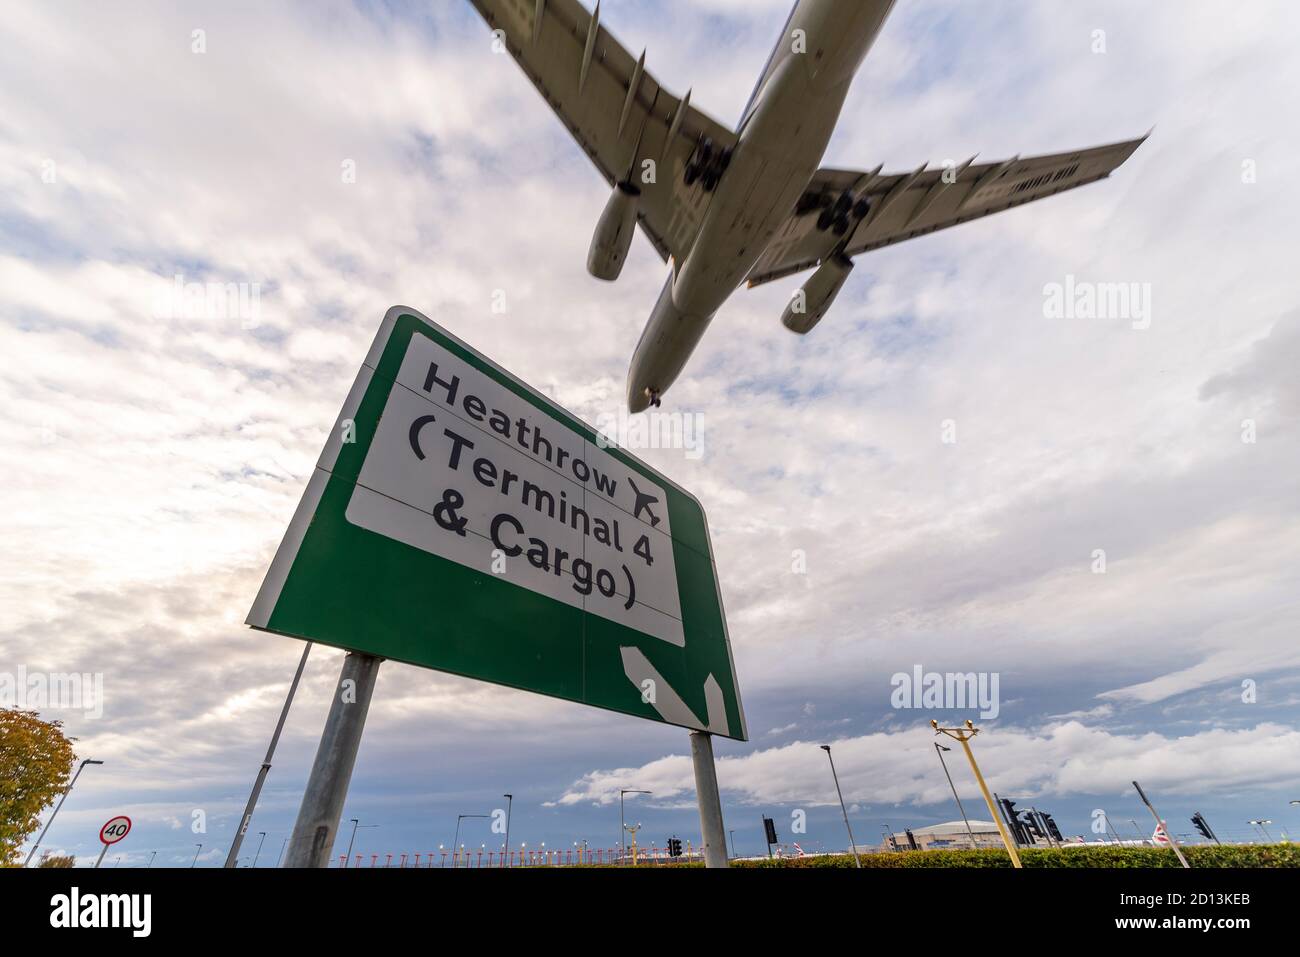 Sign for Heathrow Airport, London, UK, Terminal 4 and cargo, with a jet airliner plane landing, over A30 road. Evening arrival over local sign Stock Photo